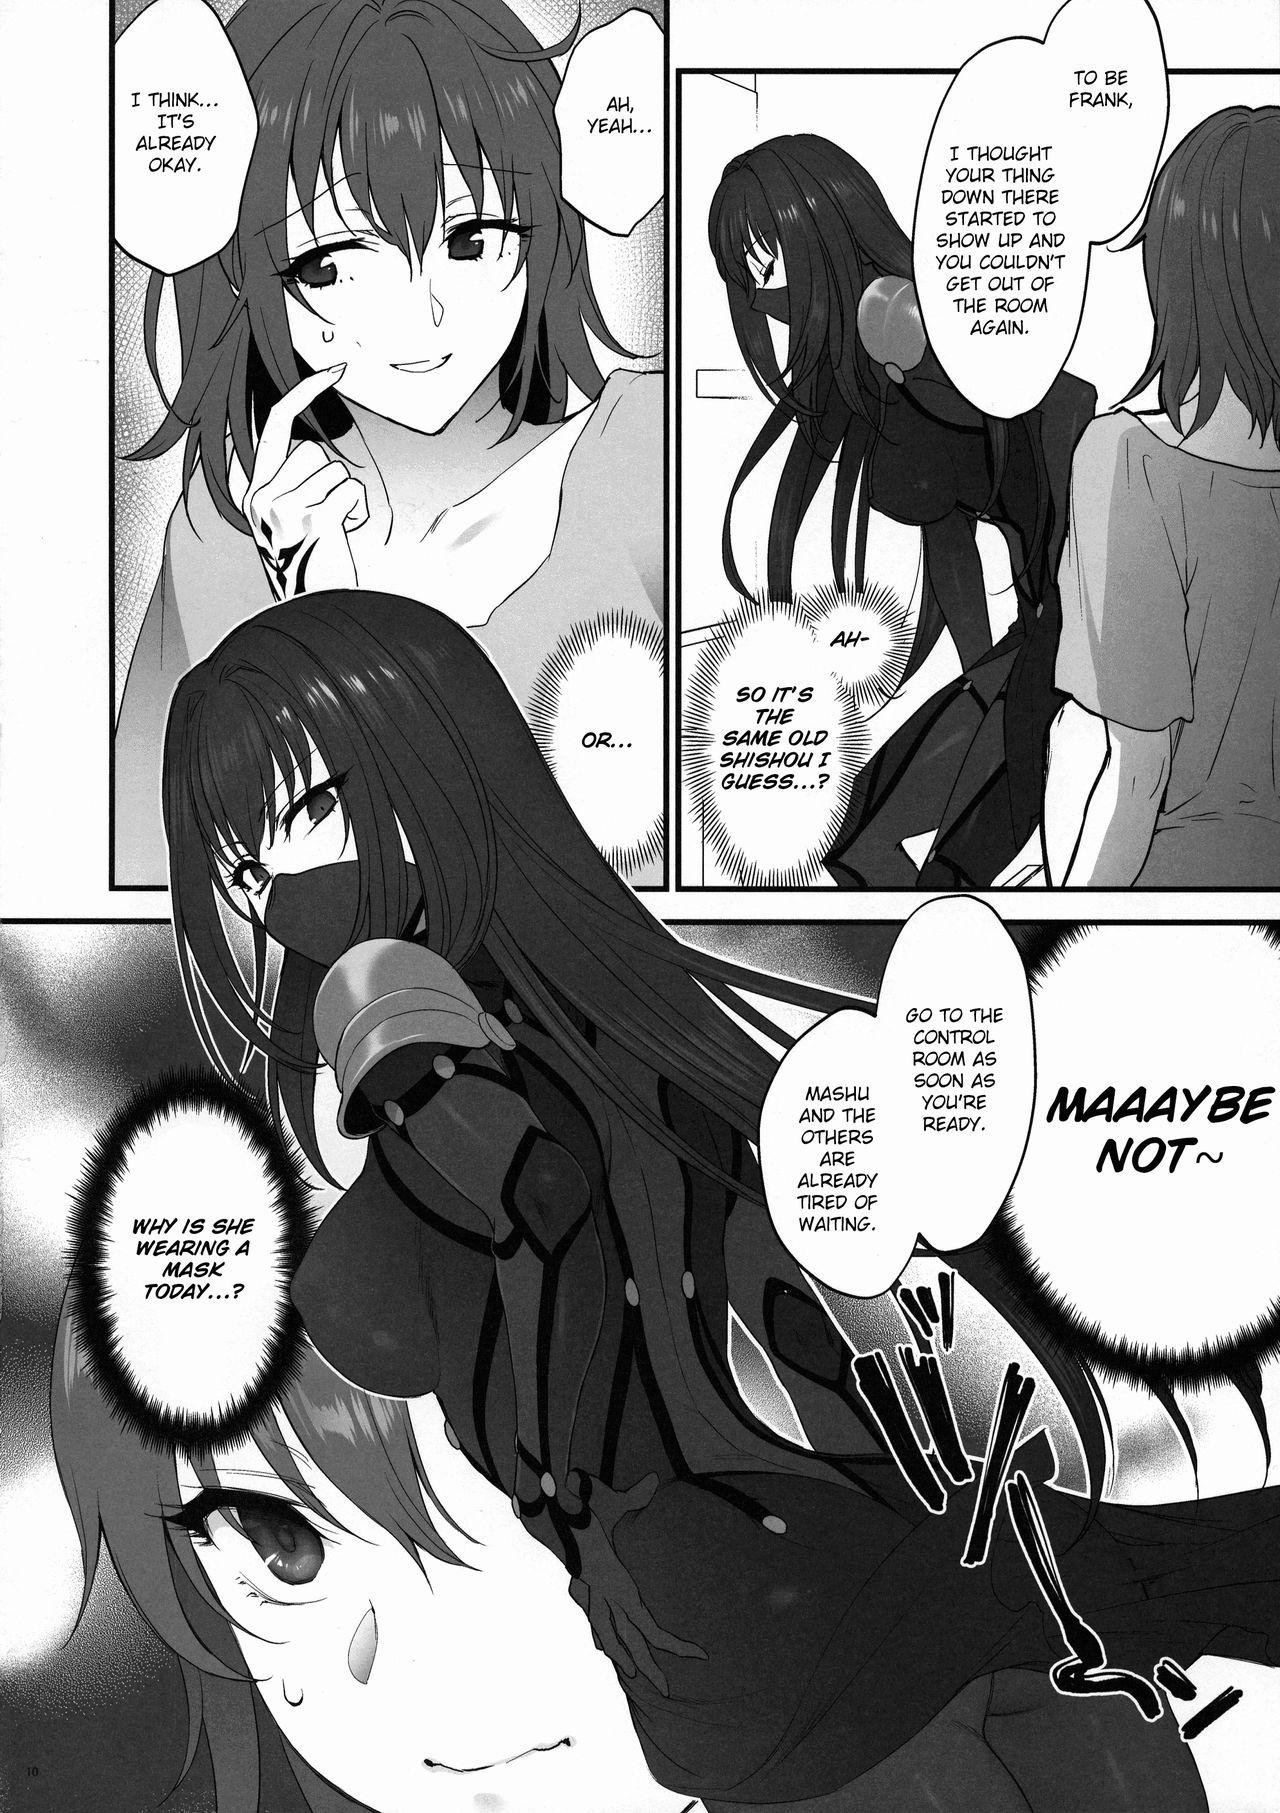 Bald Pussy Yume no Ato - Fate grand order Black Girl - Page 9